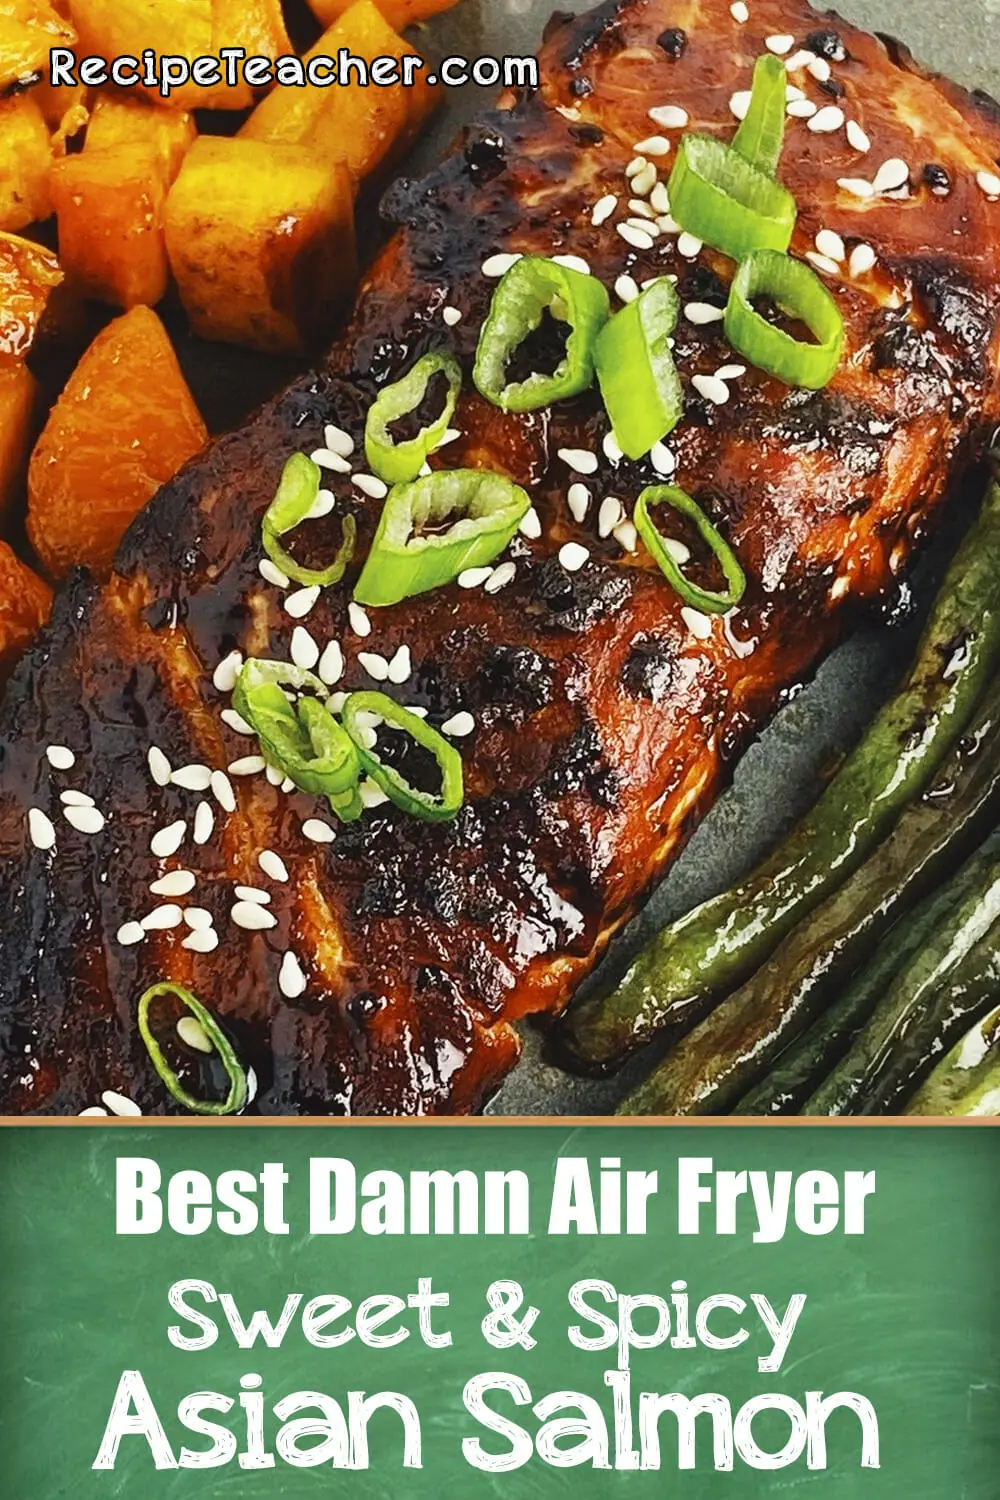 Recipe for Asian air fryer salmon